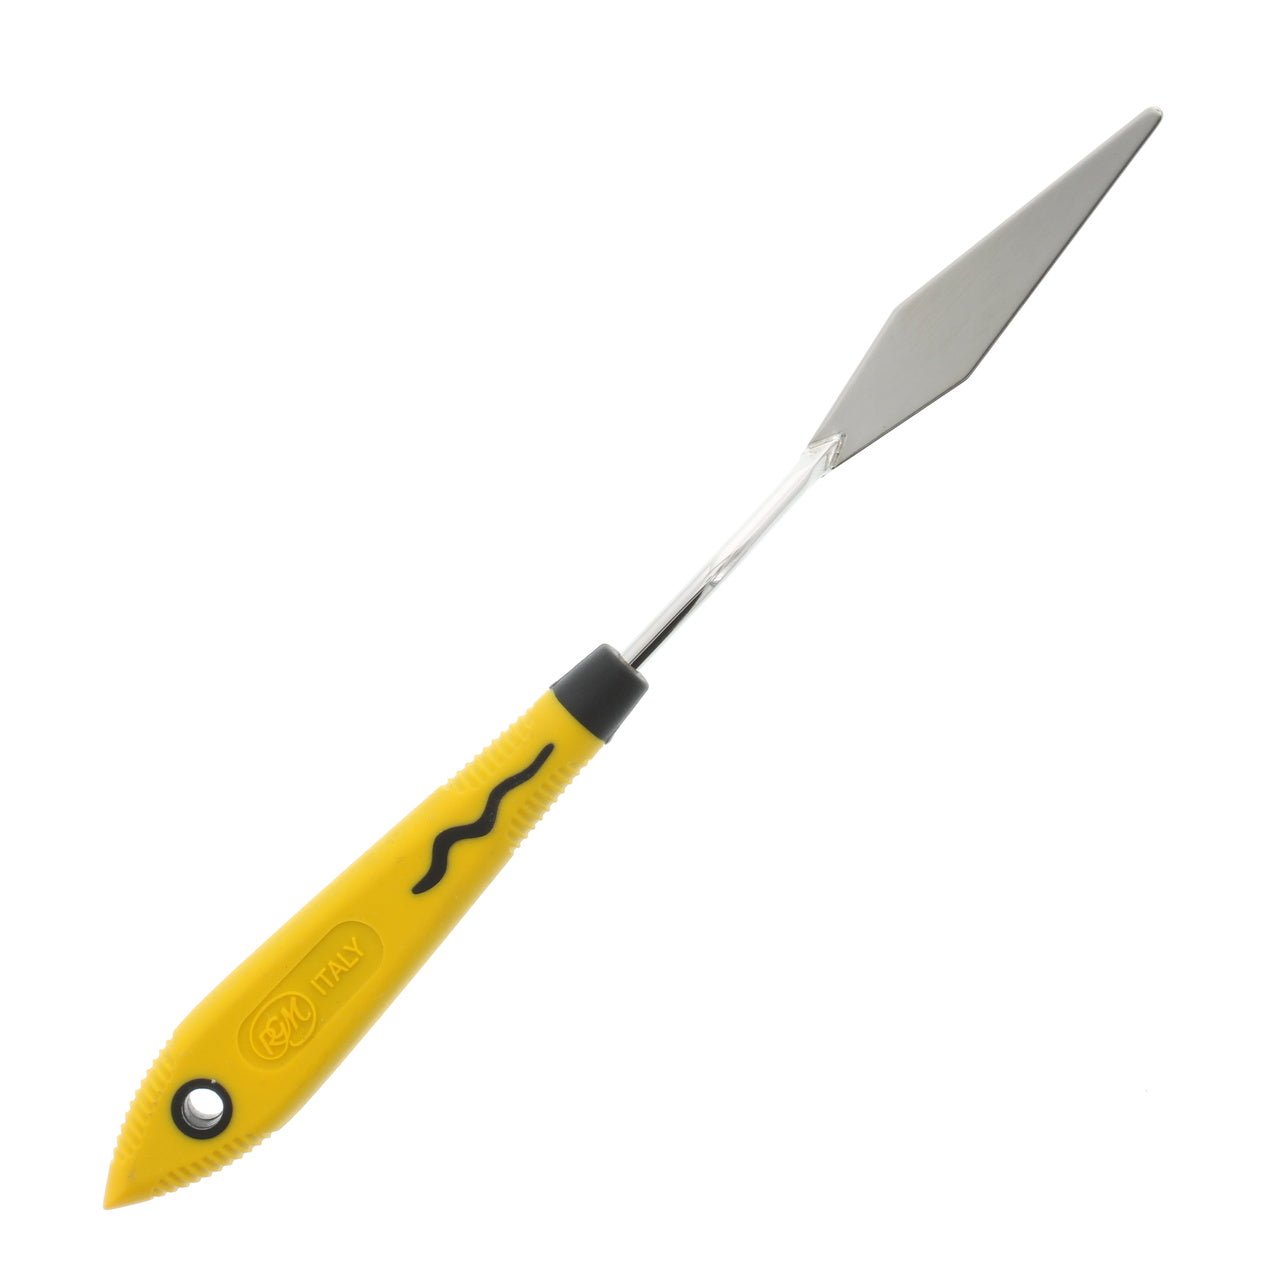 RGM Soft Grip Painting Knife #050 (Yellow Handle)